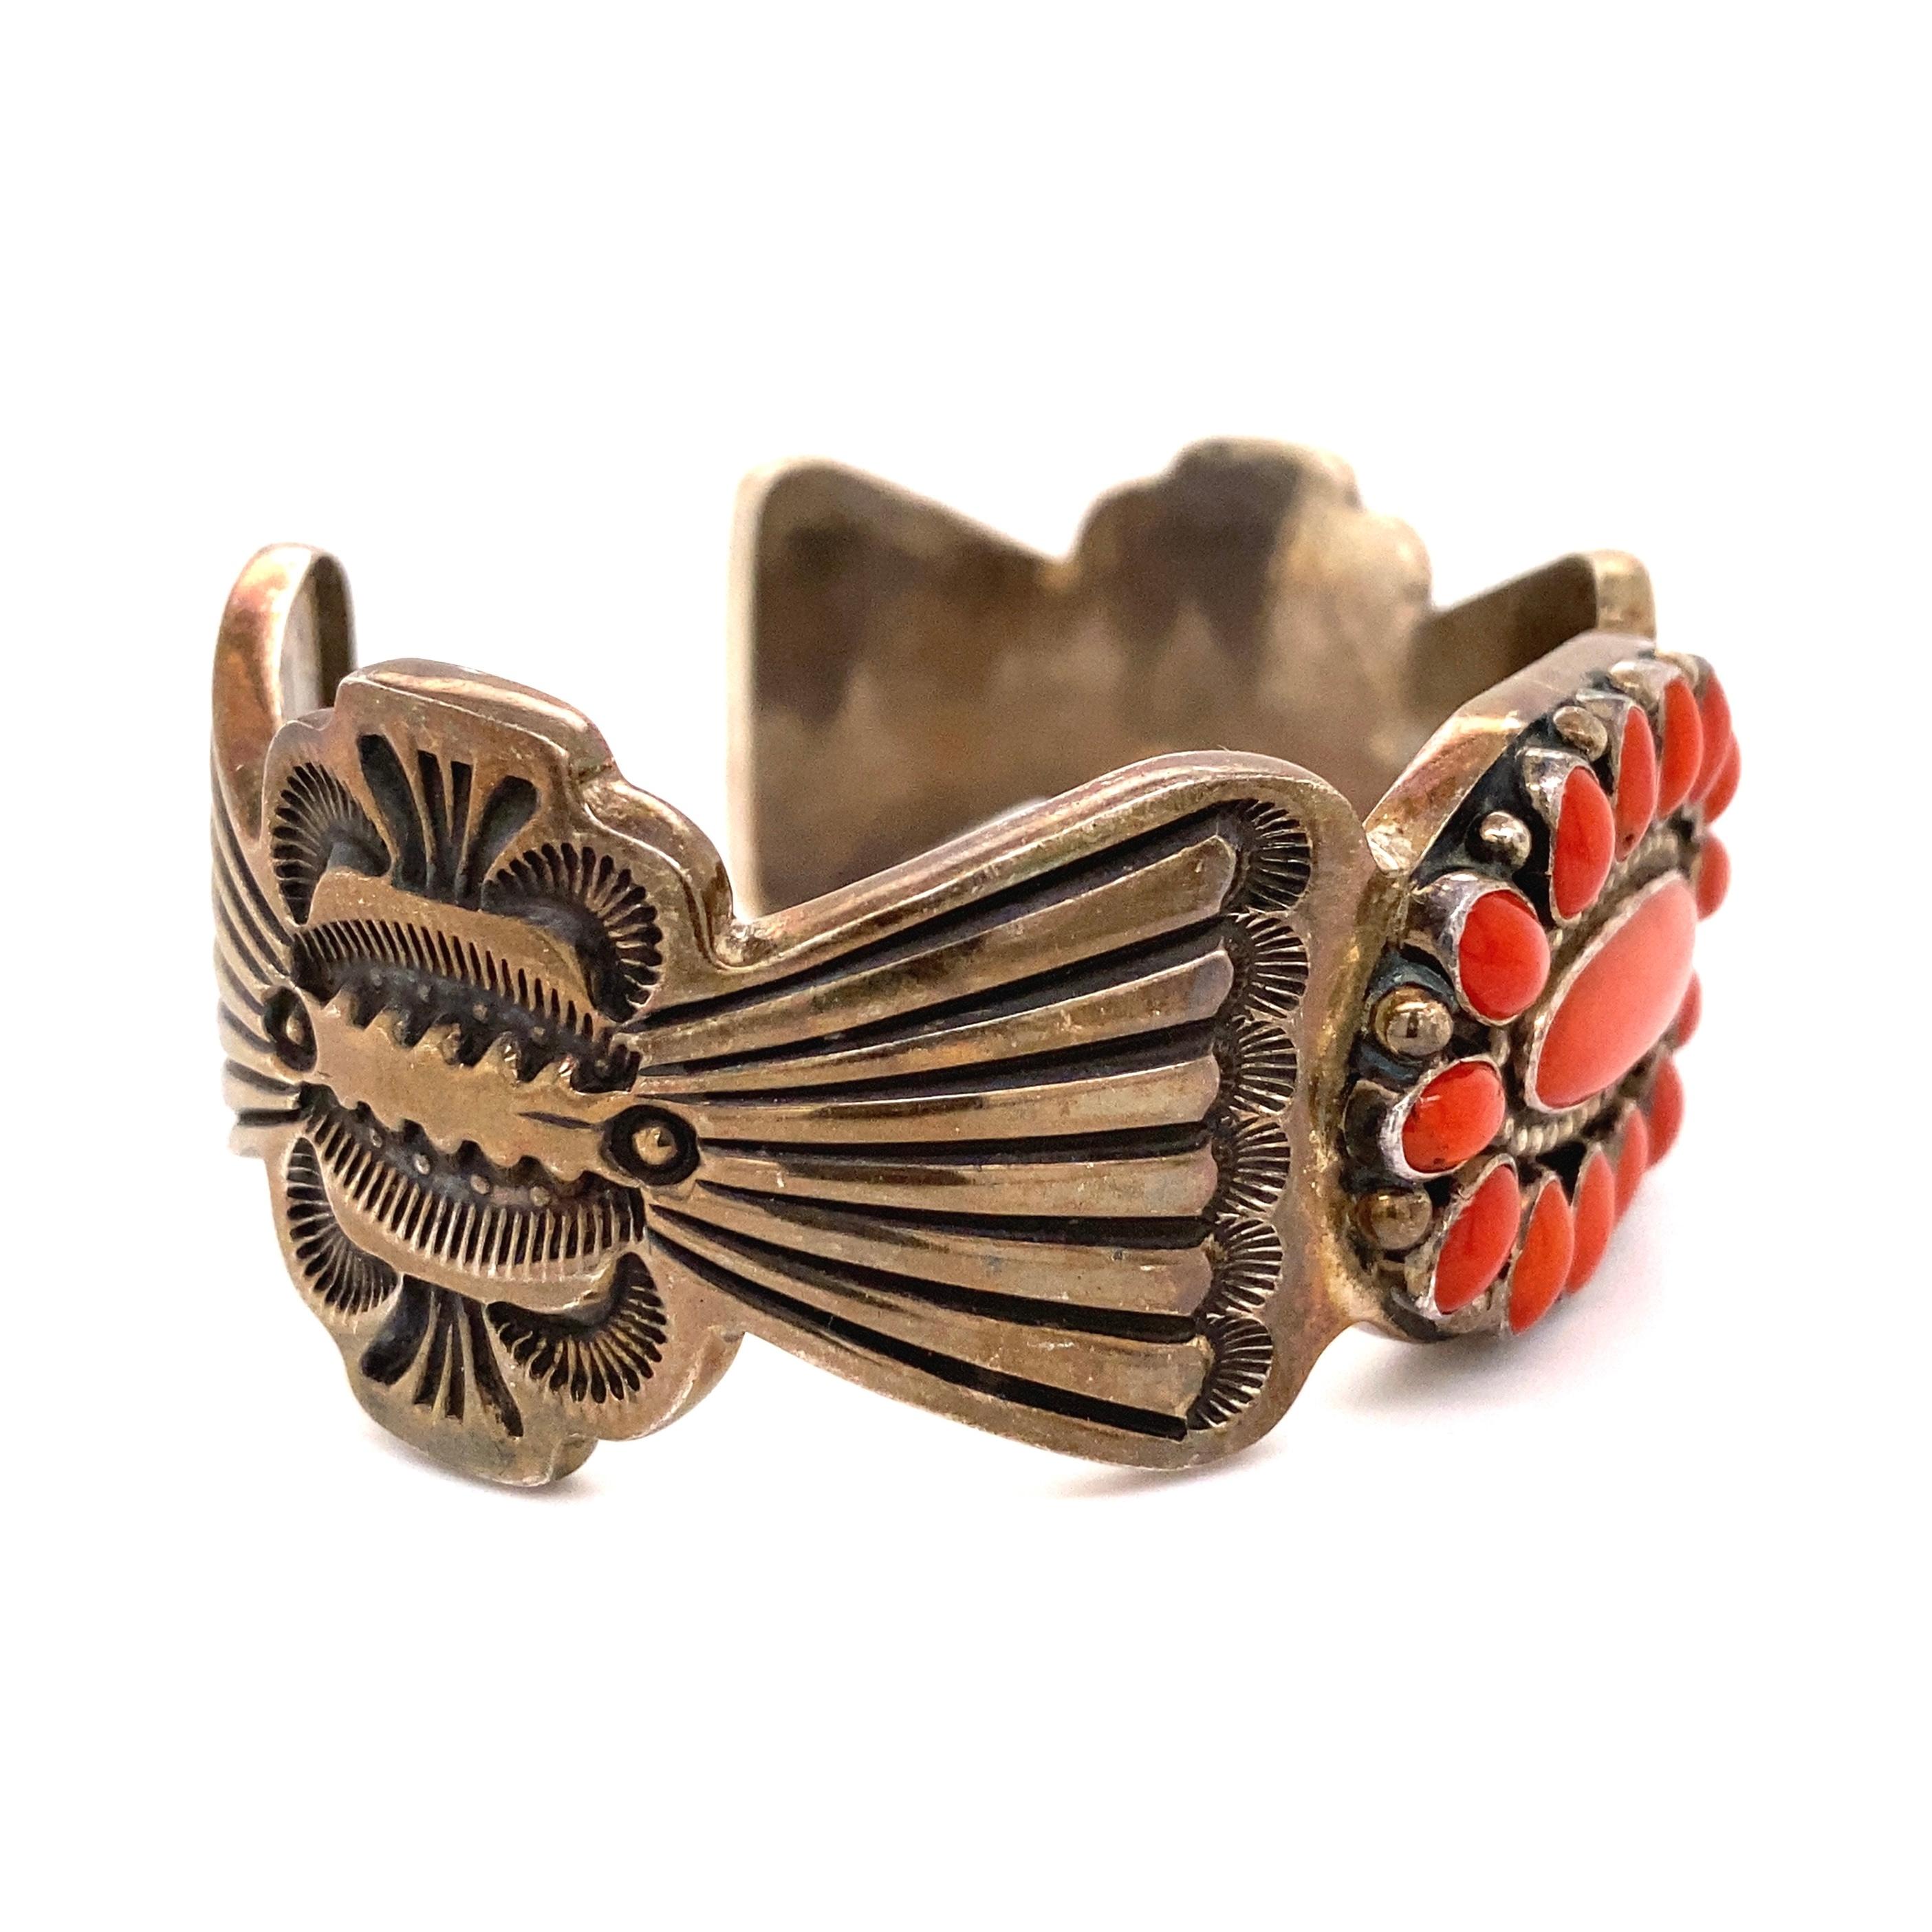 Highly desirable Very Fine Large Native American Navajo Coral Beautifully detailed sterling silver cuff bracelet. Hand set with Coral. Signed ERB. Approx. Dimensions: 2.30” L x 2.91” W x 1.31” H.  Hand crafted in 925 Sterling Silver. More Beautiful